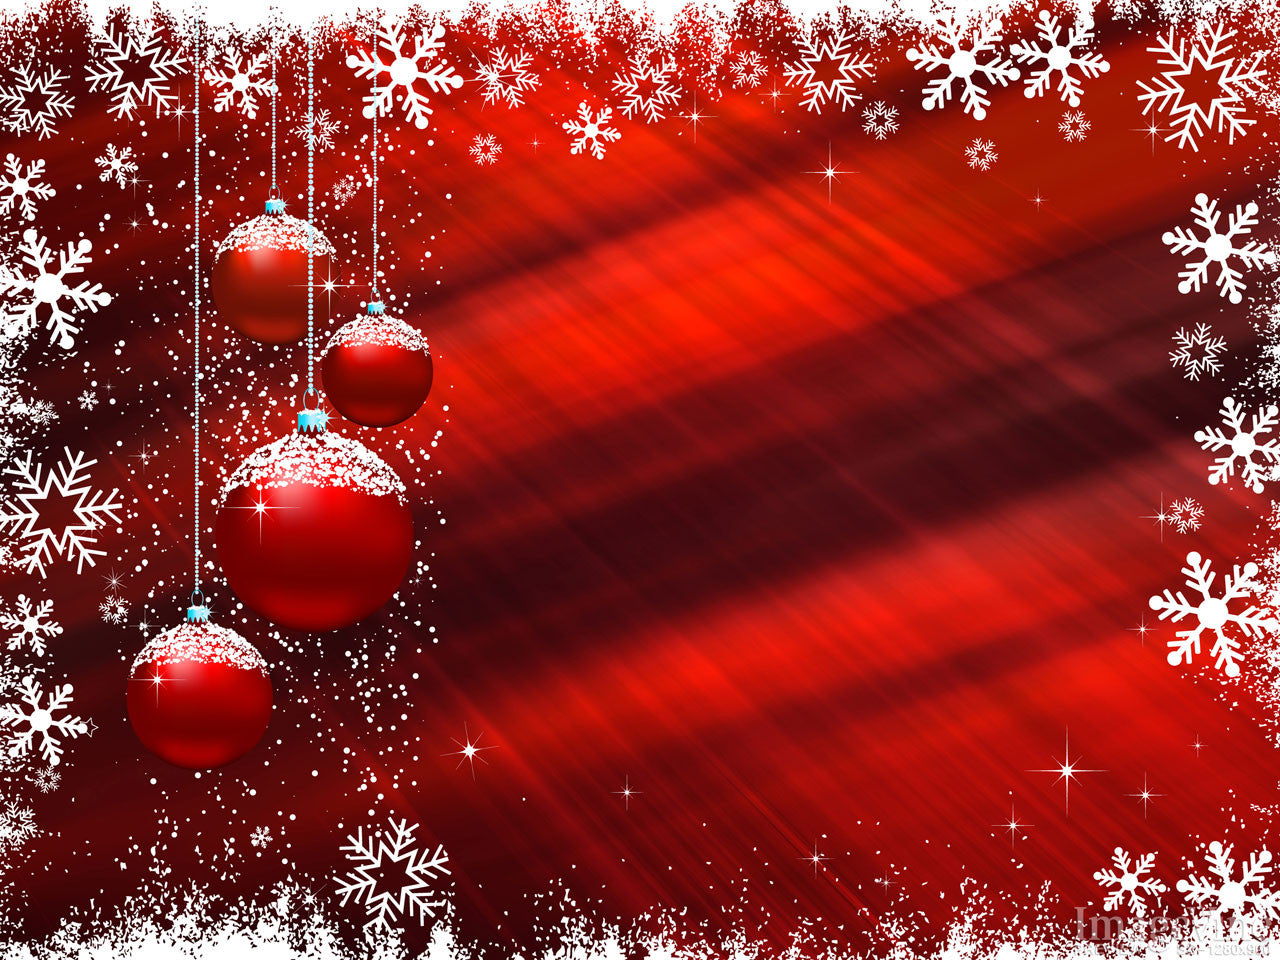 Christmas Color Imagevine Coloring Wallpapers Download Free Images Wallpaper [coloring436.blogspot.com]